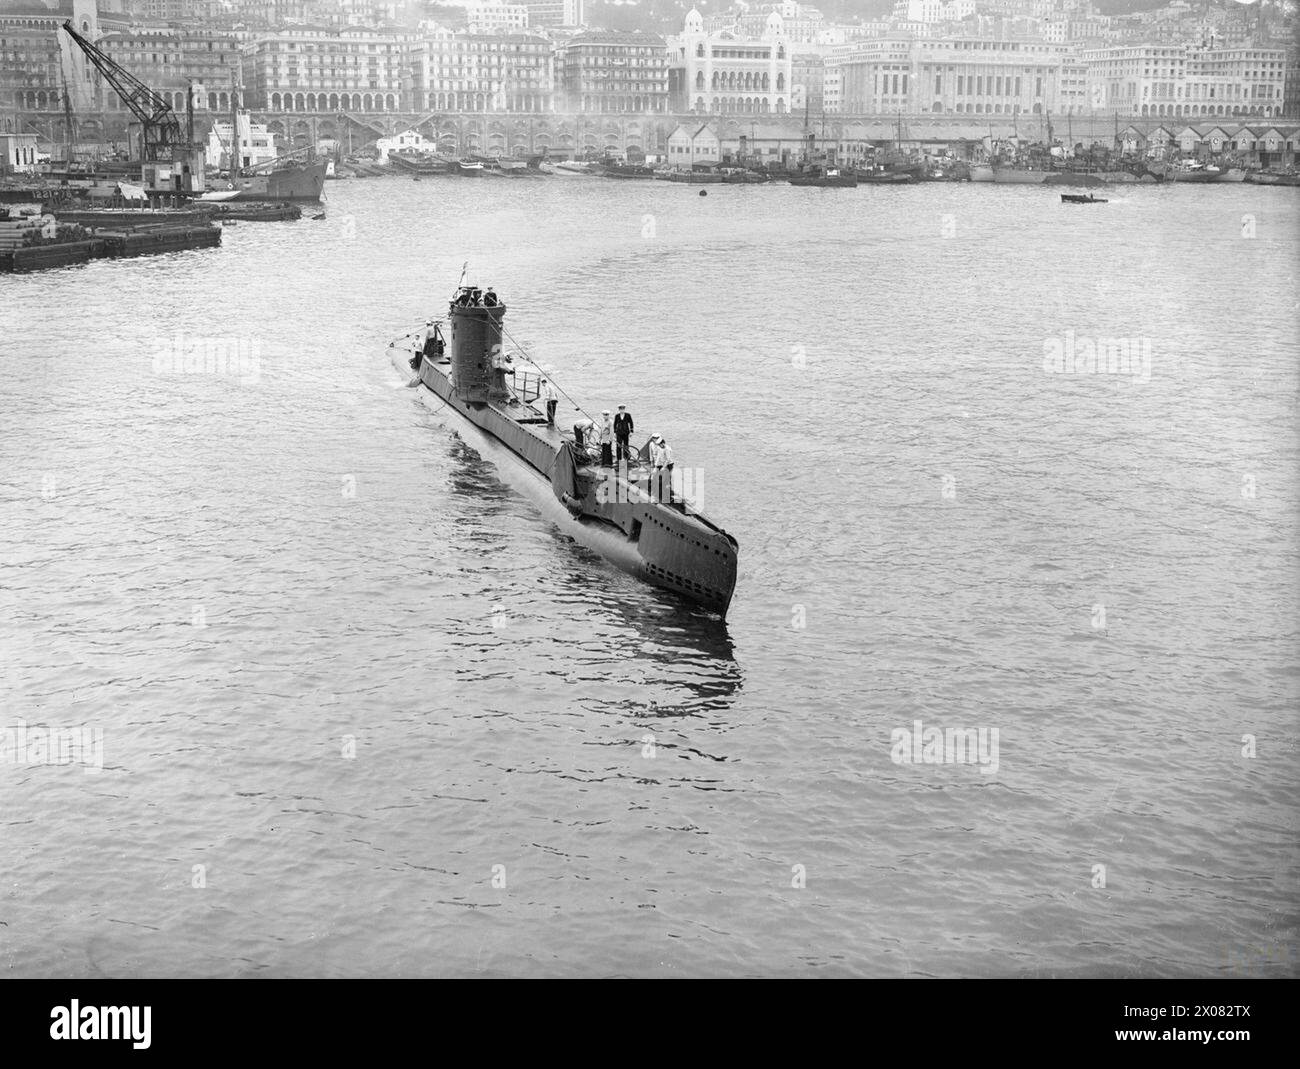 THE SUBMARINE SERVICE. 26 TO 29 APRIL 1943, ALGIERS. - HM SUBMARINE UPROAR coming in from patrol Stock Photo